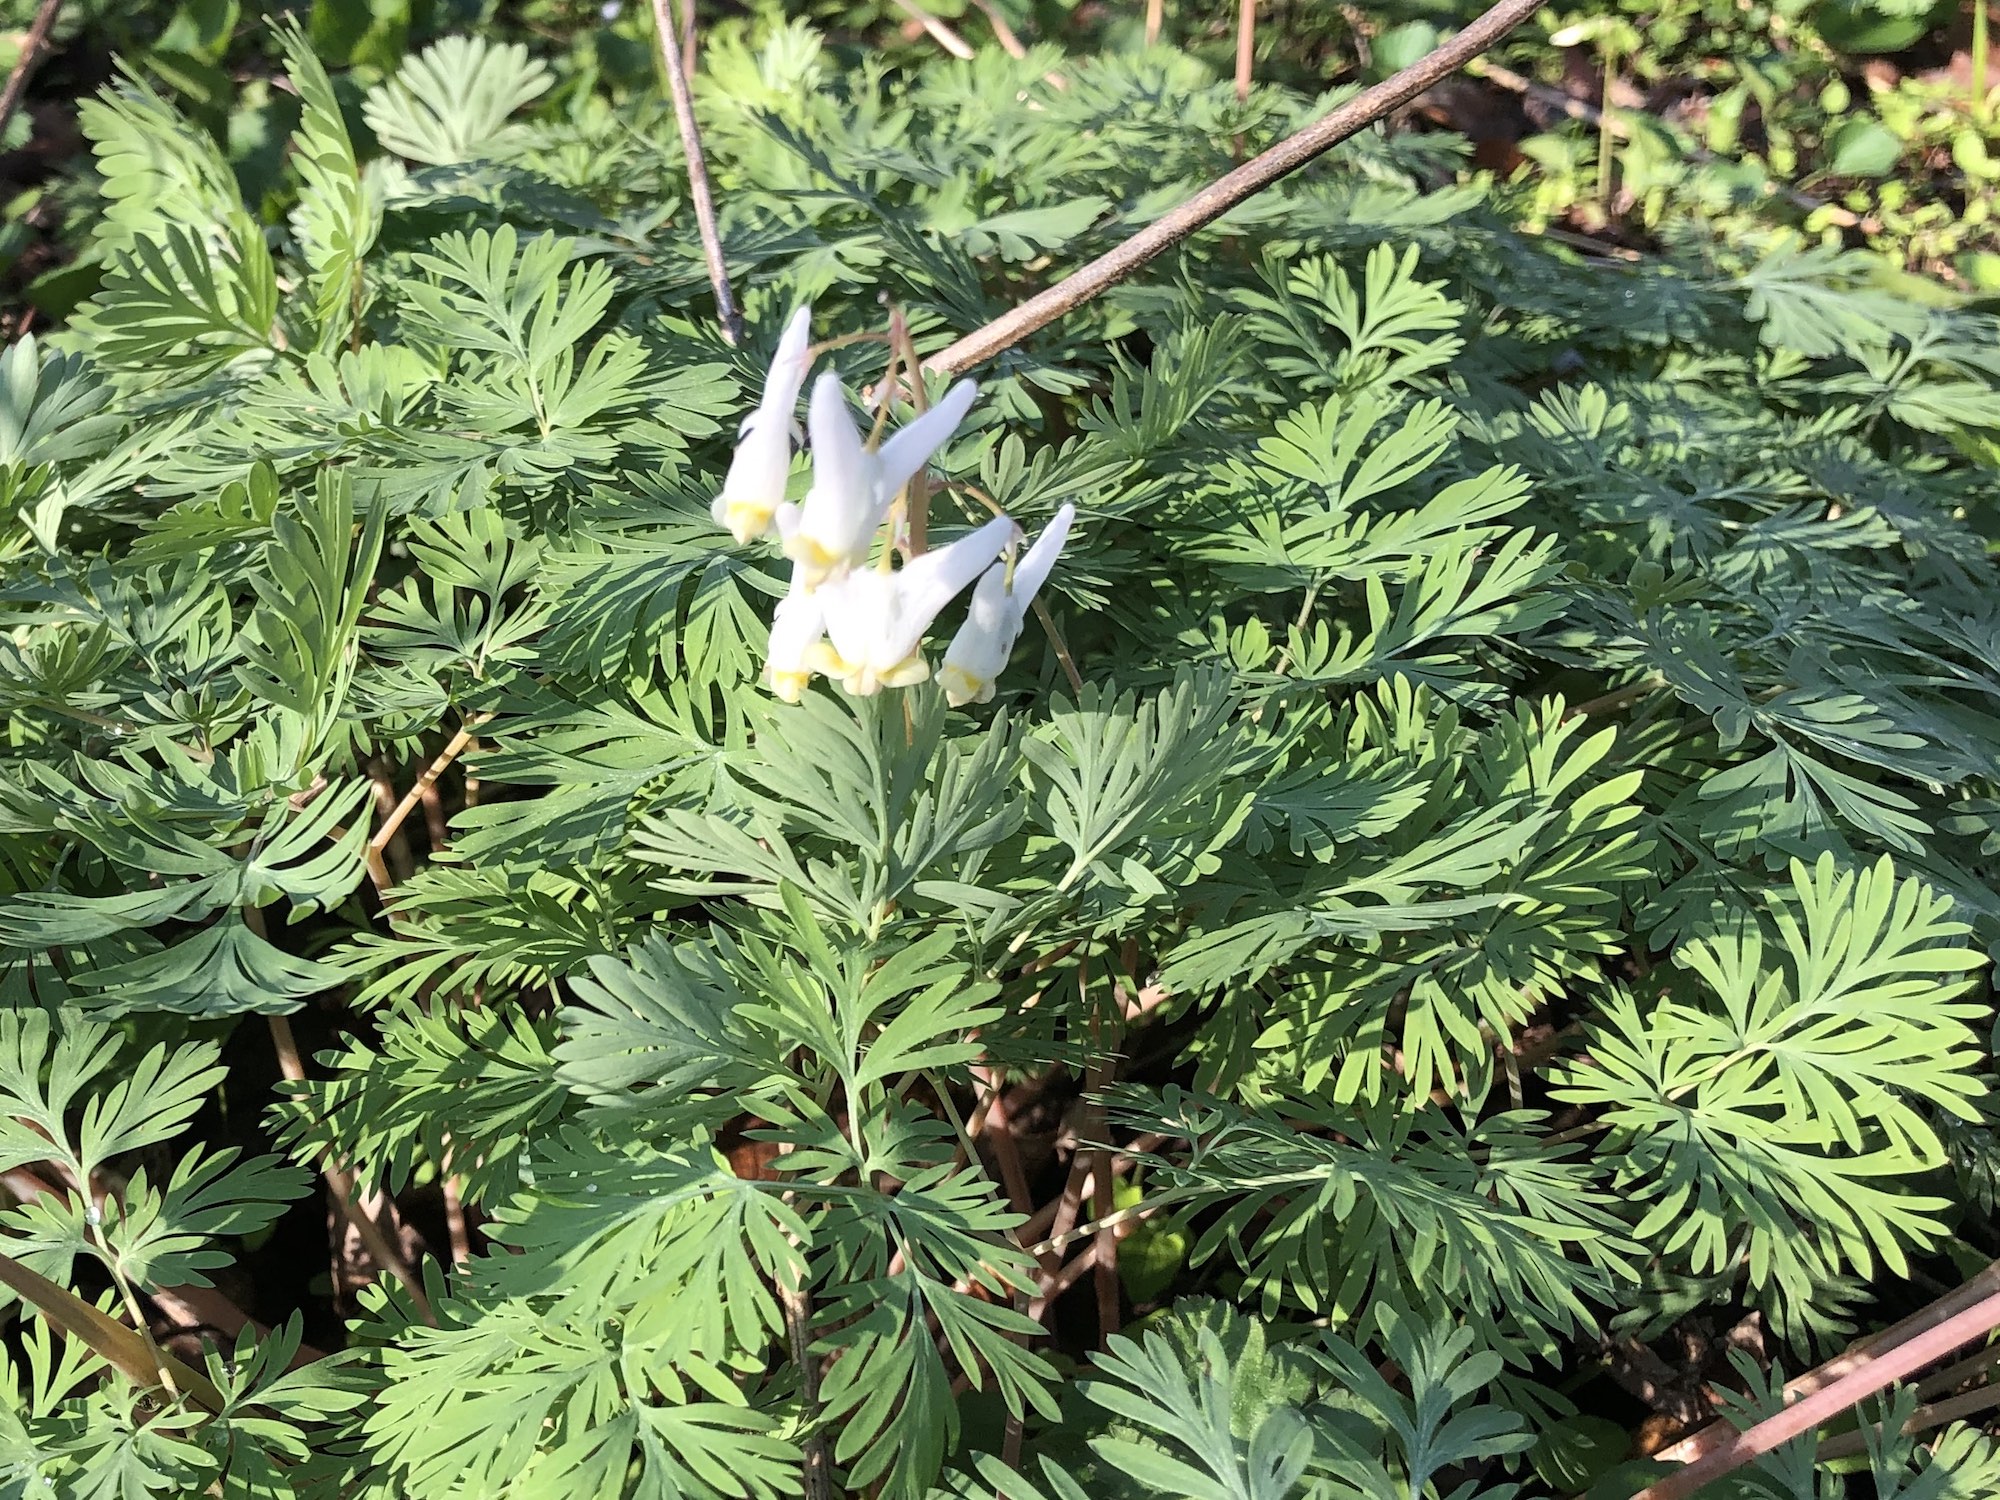 Dutchman's Breeches on April 26, 2019 by Duck Pond.